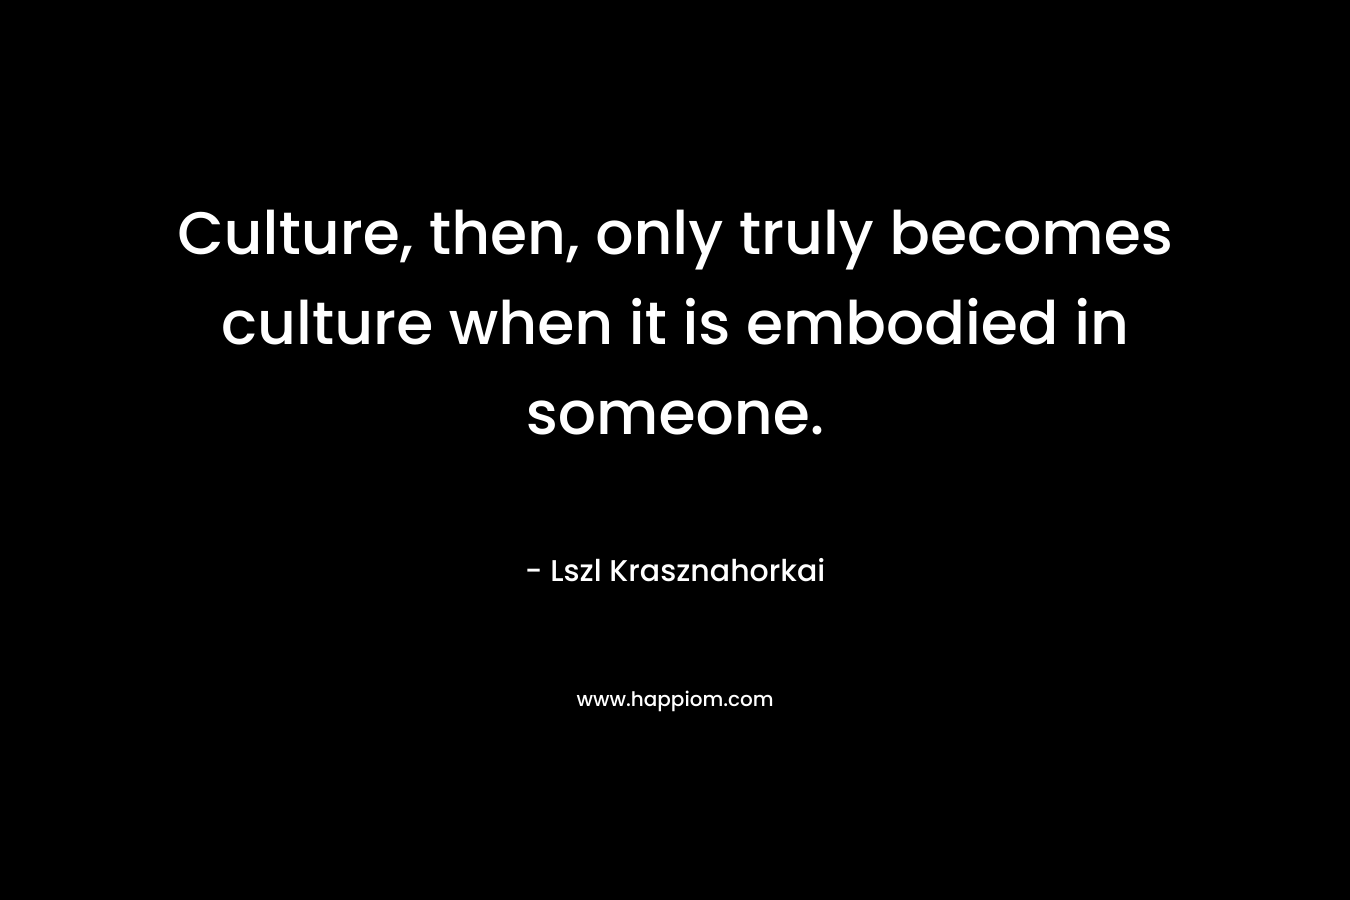 Culture, then, only truly becomes culture when it is embodied in someone. – Lszl Krasznahorkai